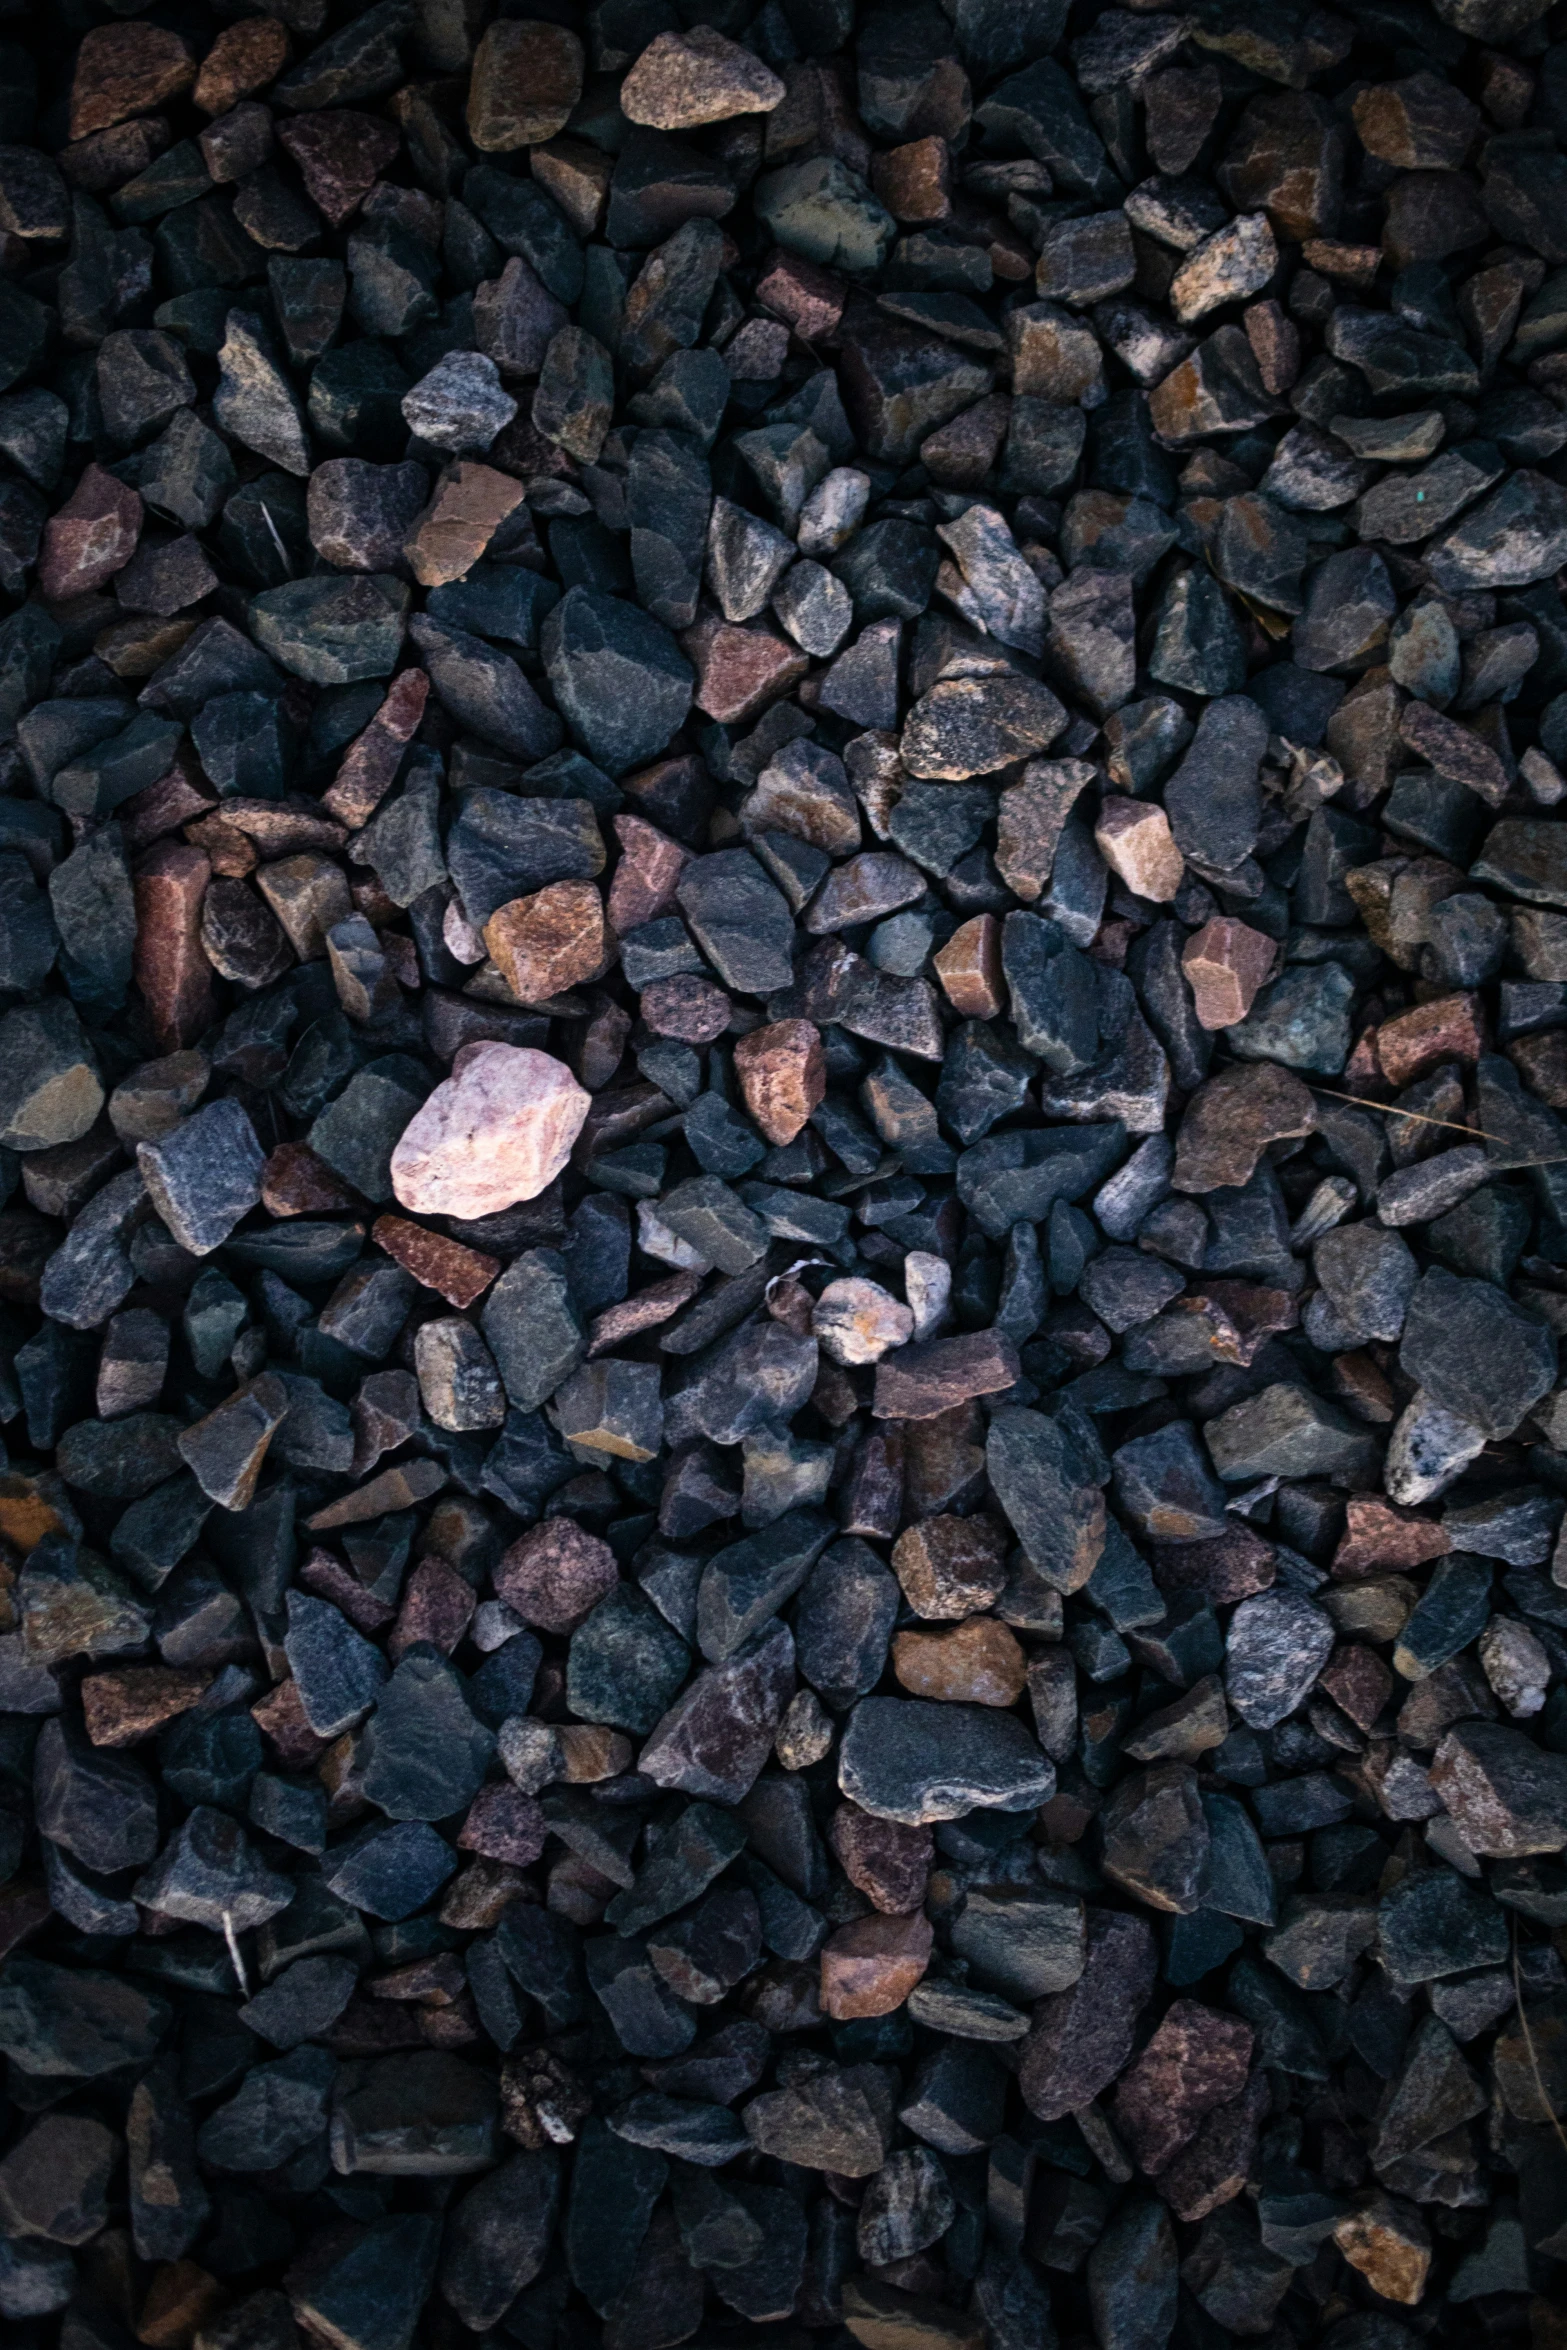 rocks and gravel are seen here from above